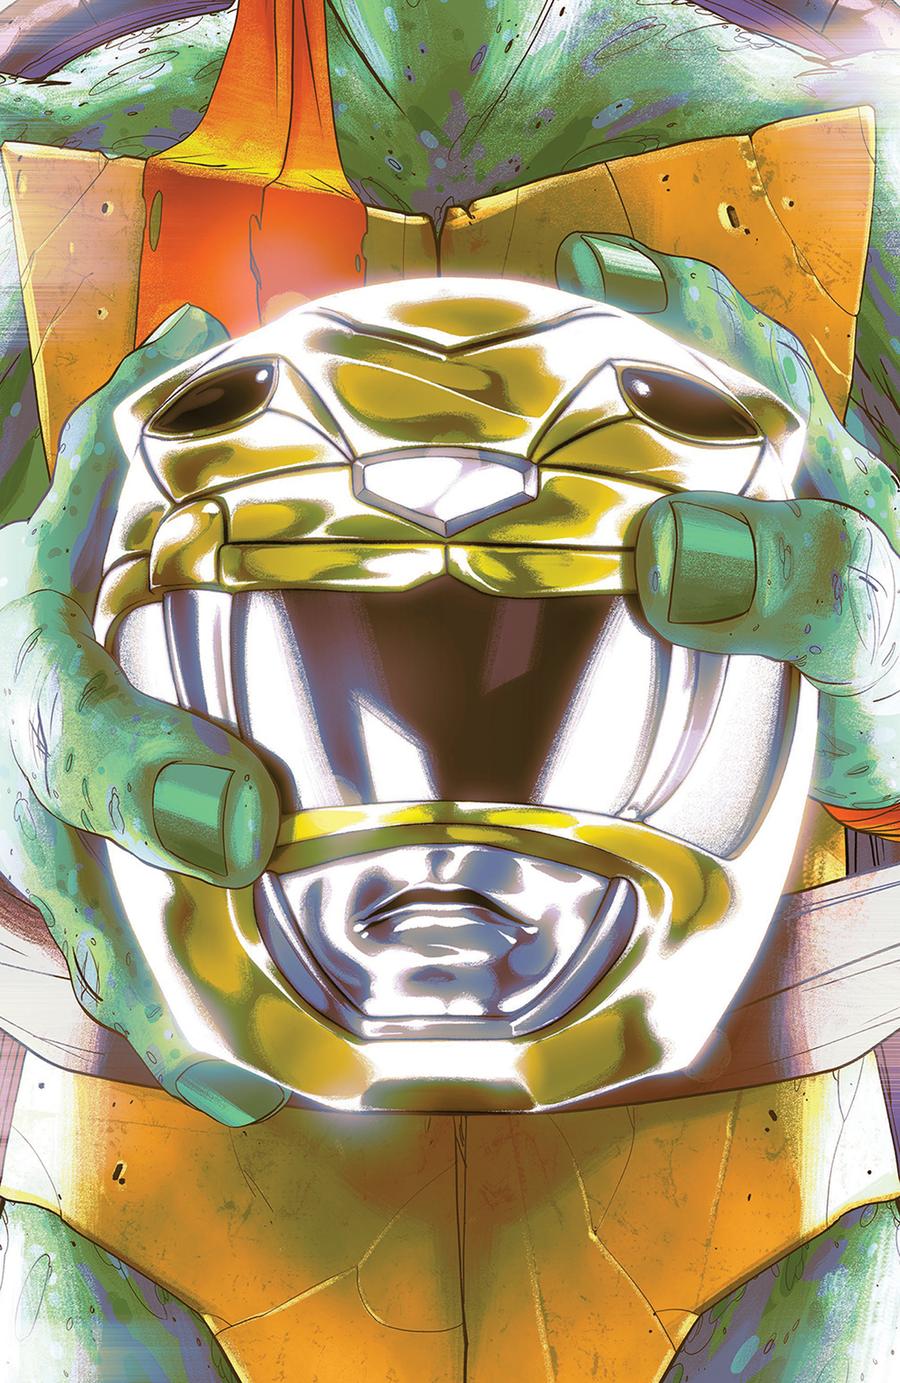 Mighty Morphin Power Rangers Teenage Mutant Ninja Turtles #2 Cover D Variant Goni Montes Cover